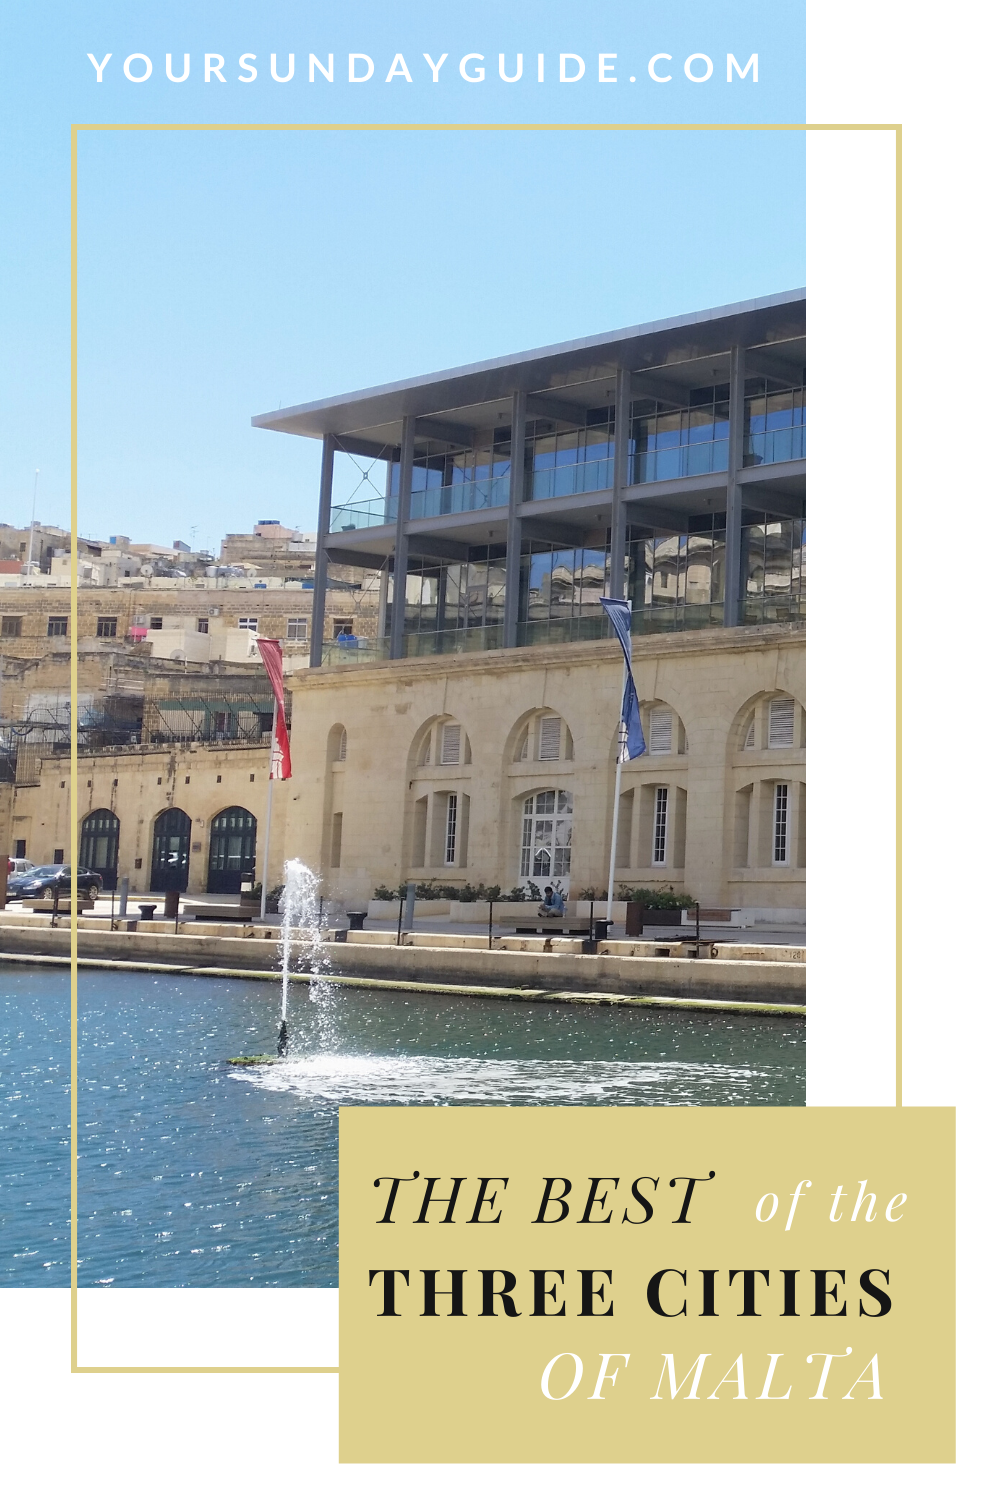 What to see in the Three cities of Malta